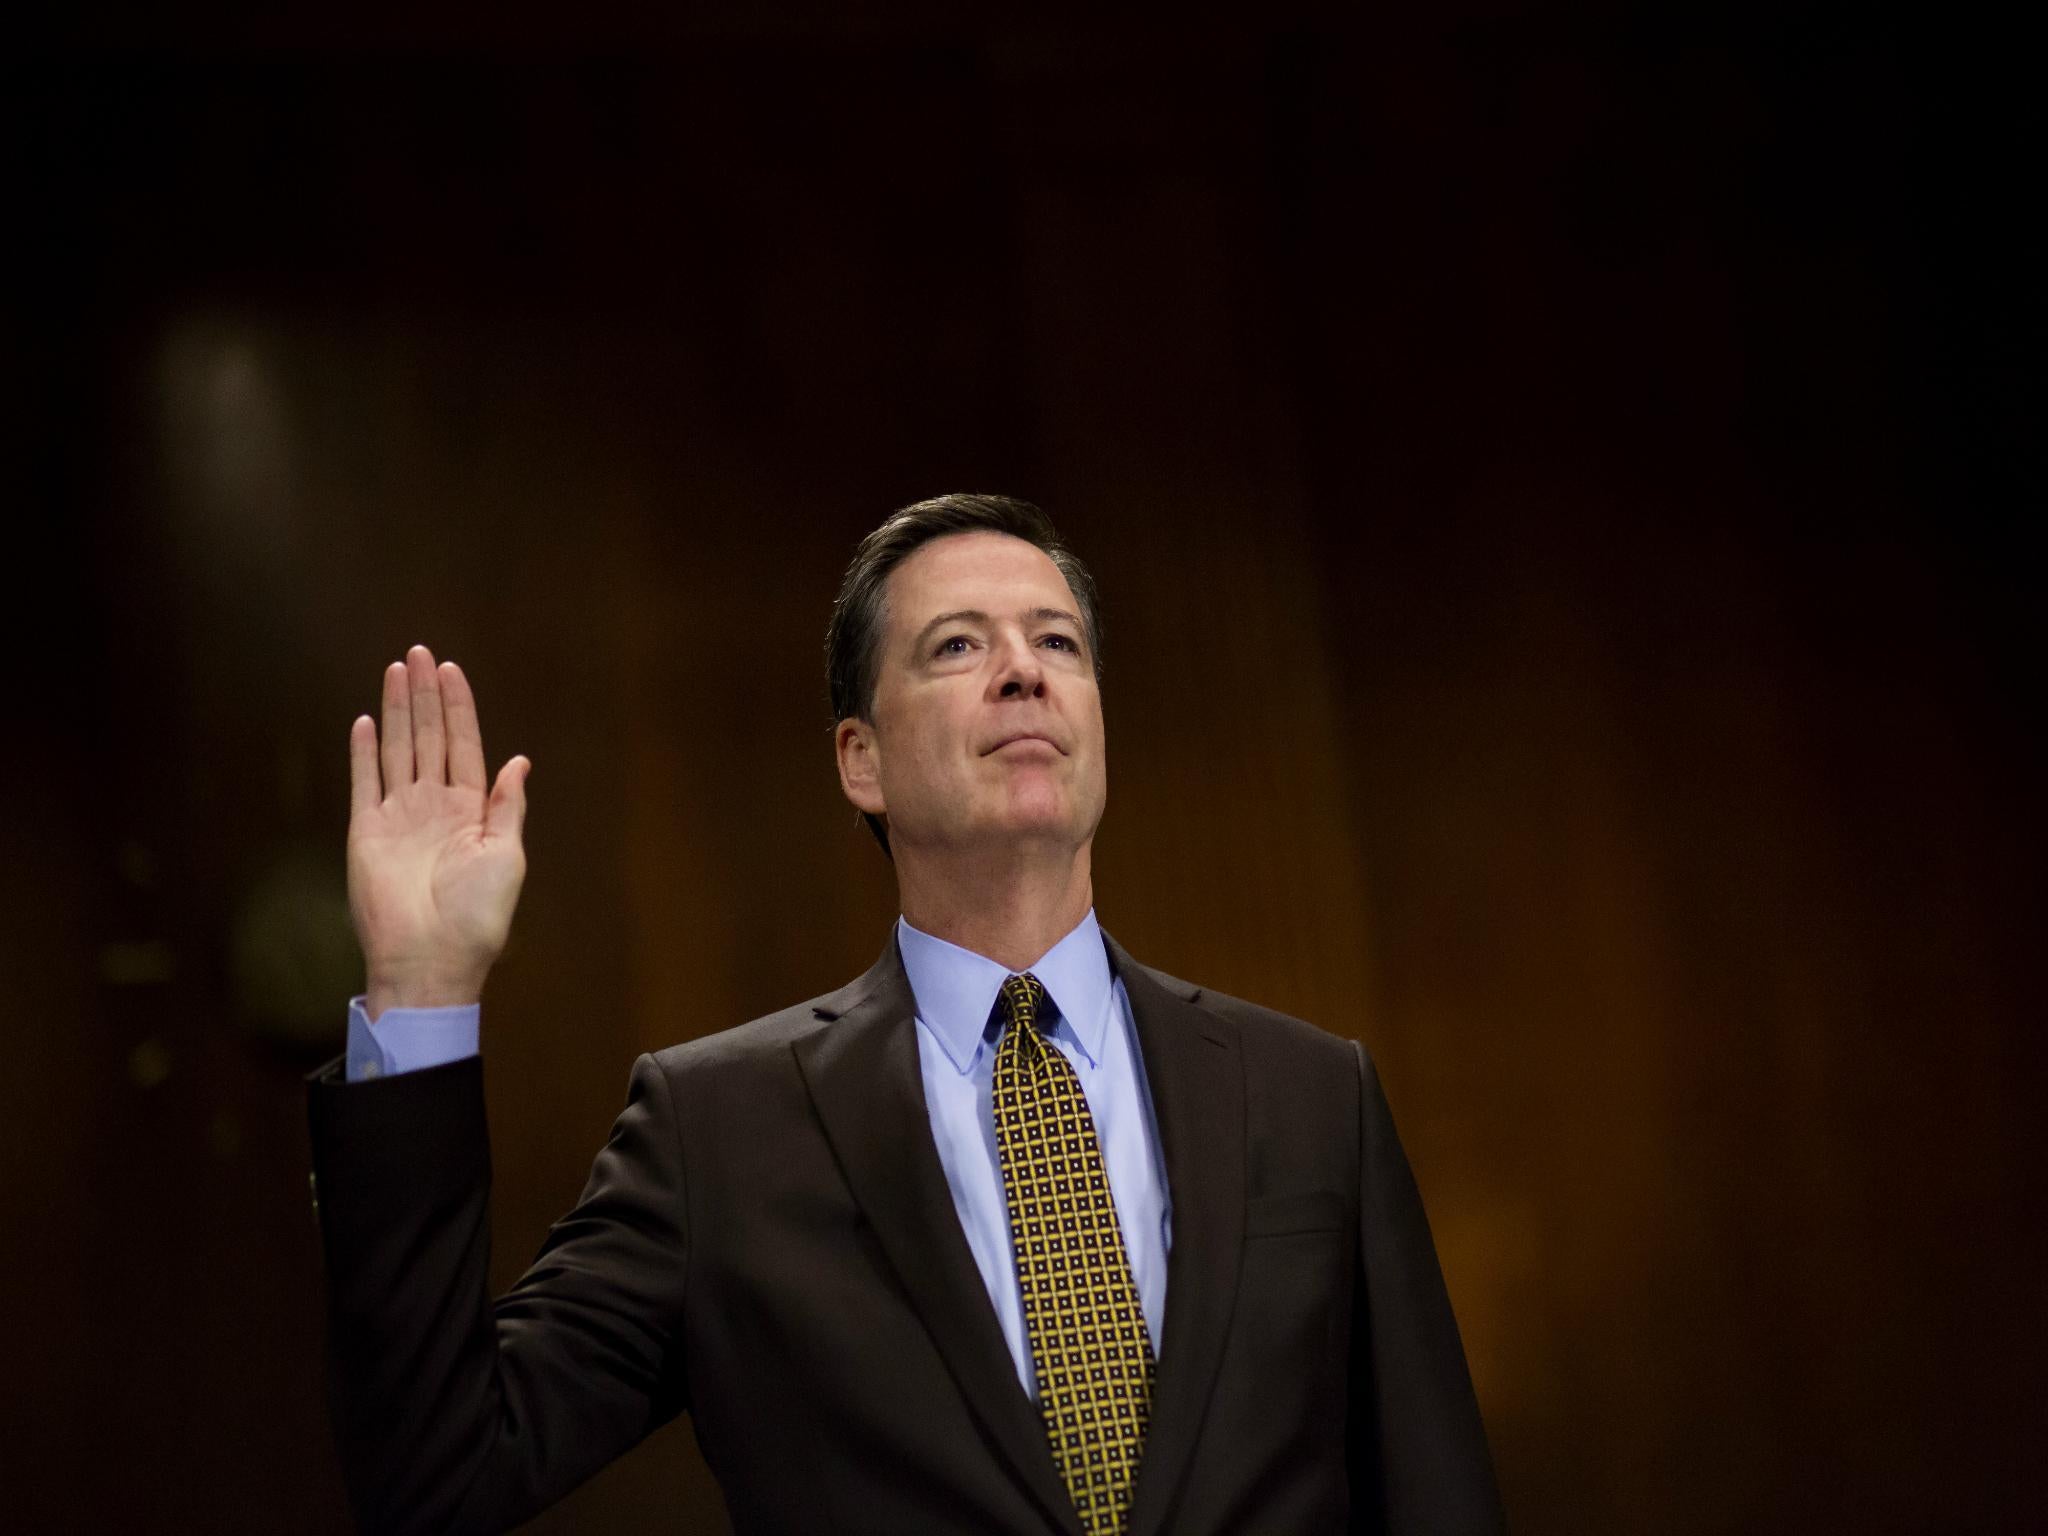 Former FBI Director James Comey says he is willing to testify publicly in front of the Senate